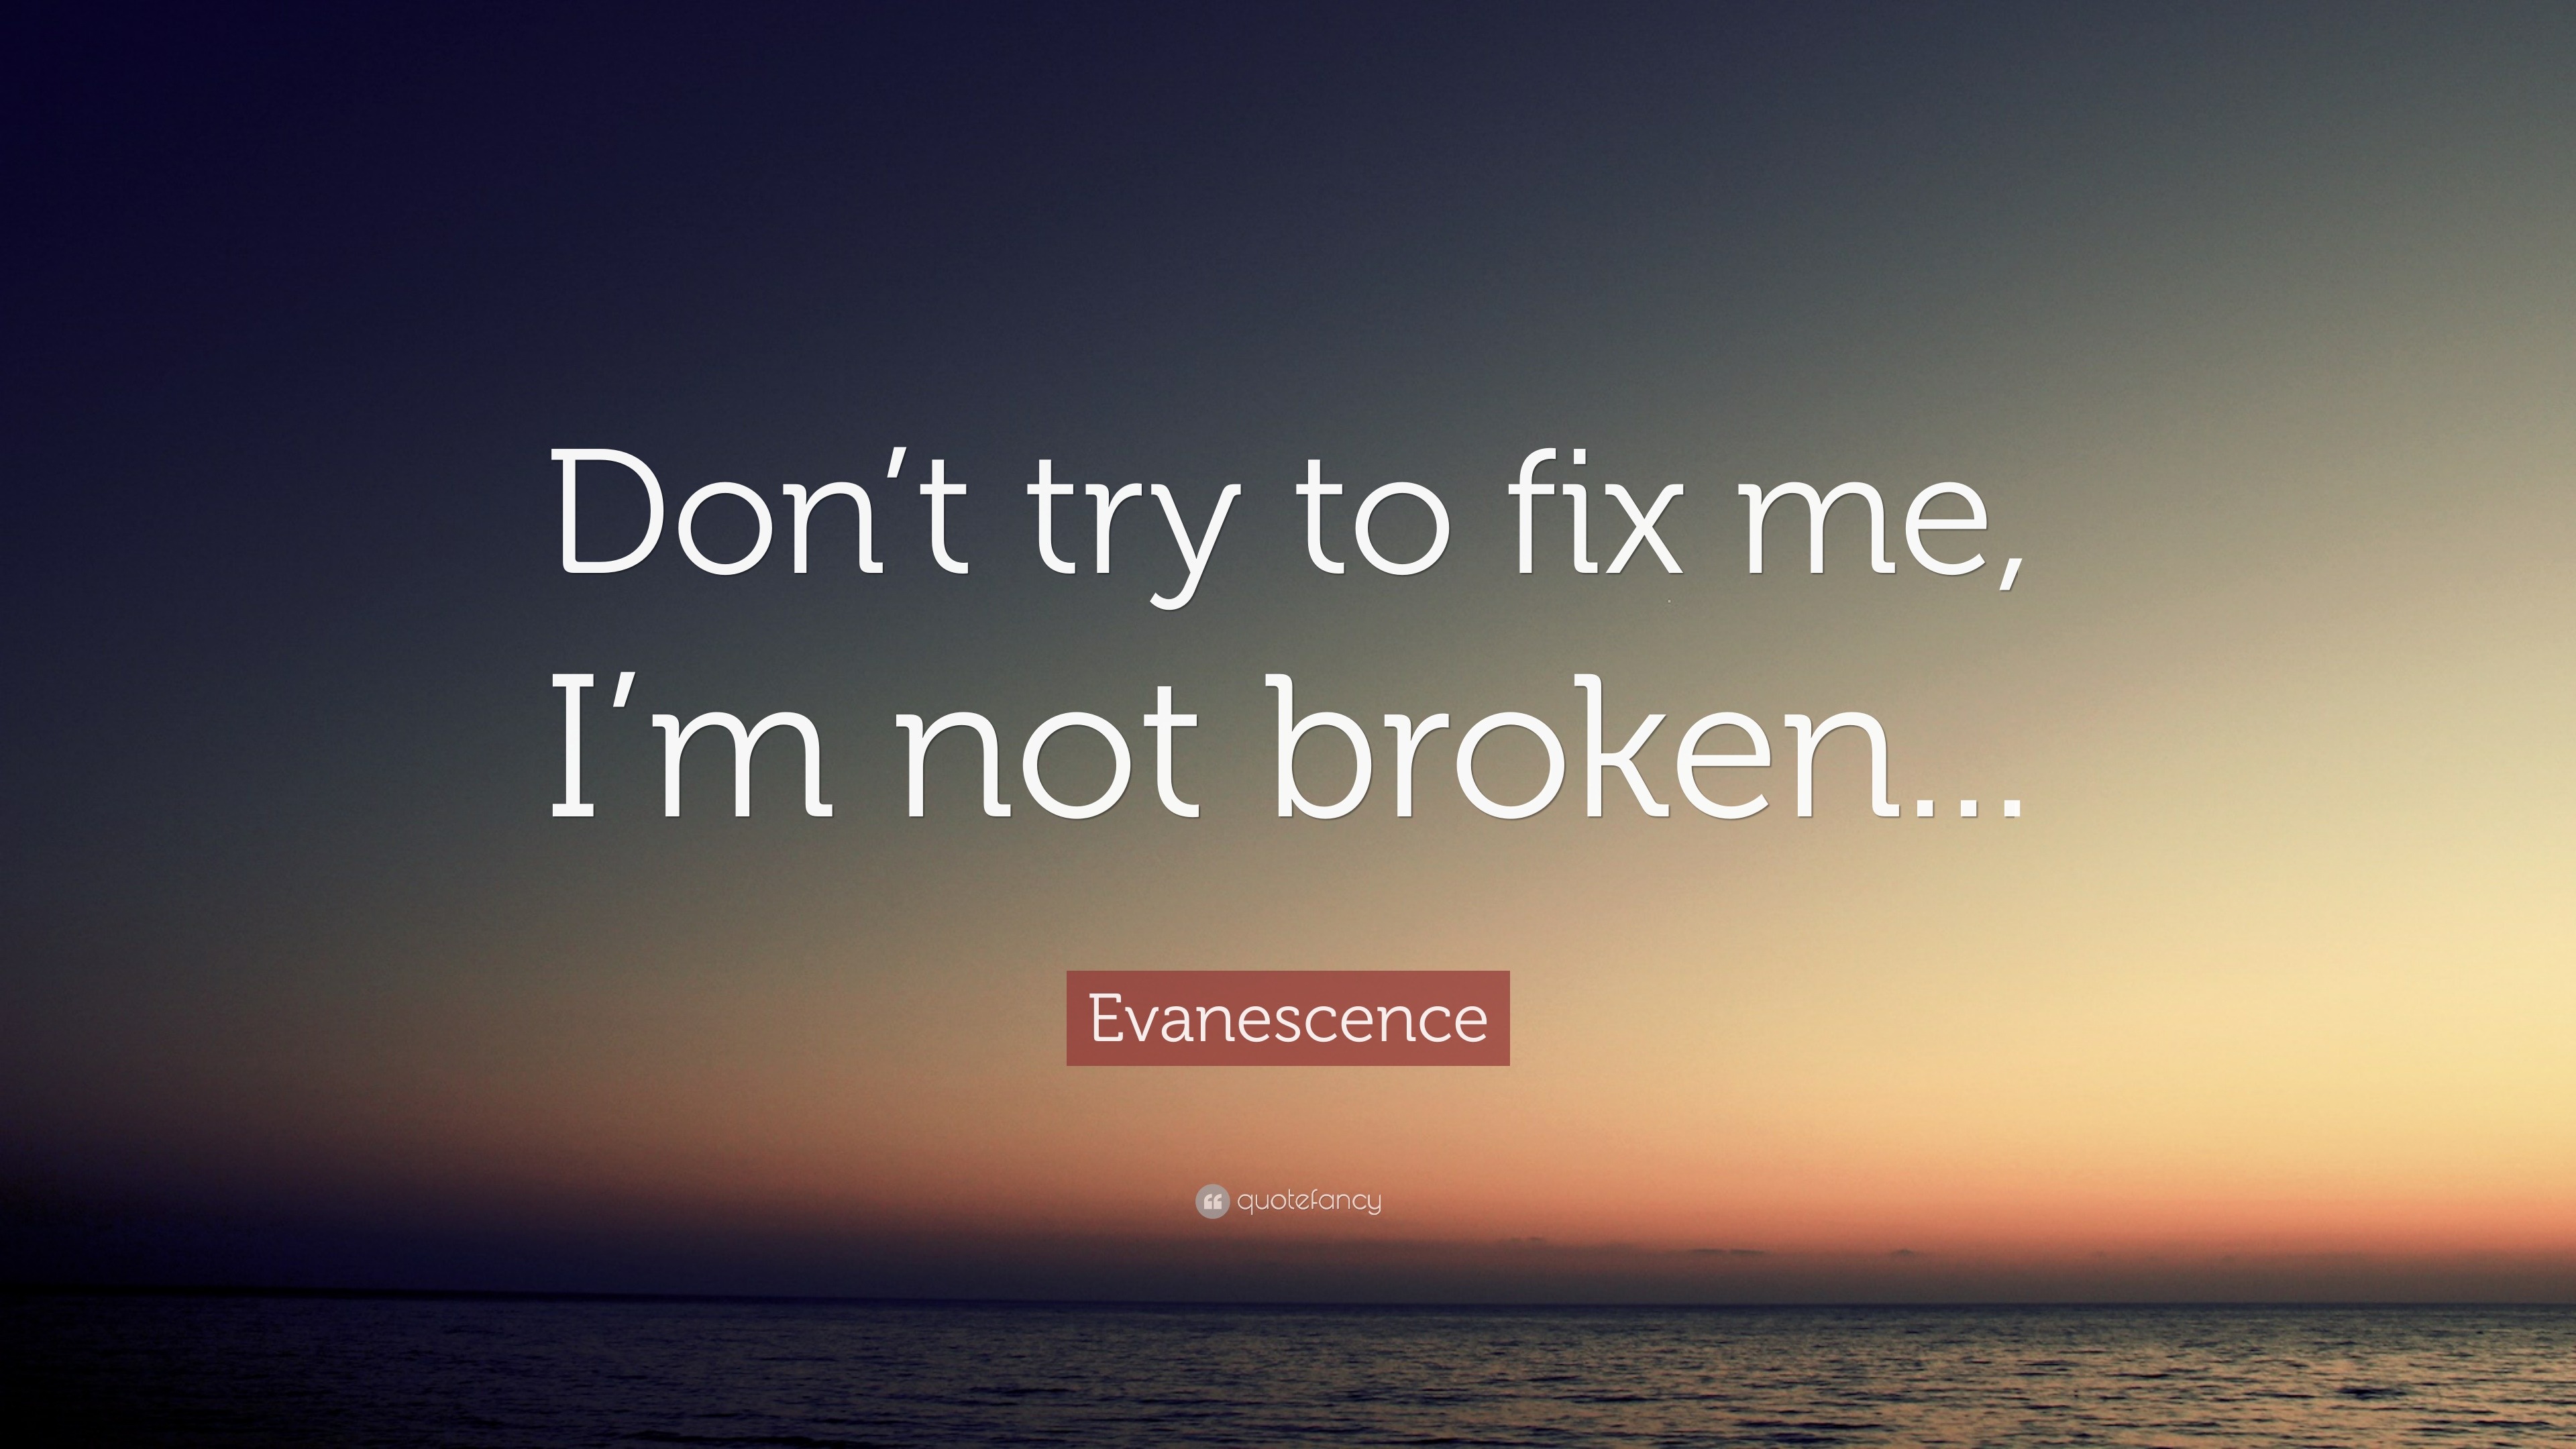 Evanescence Quote: “Don't try to fix me, I'm not broken...”